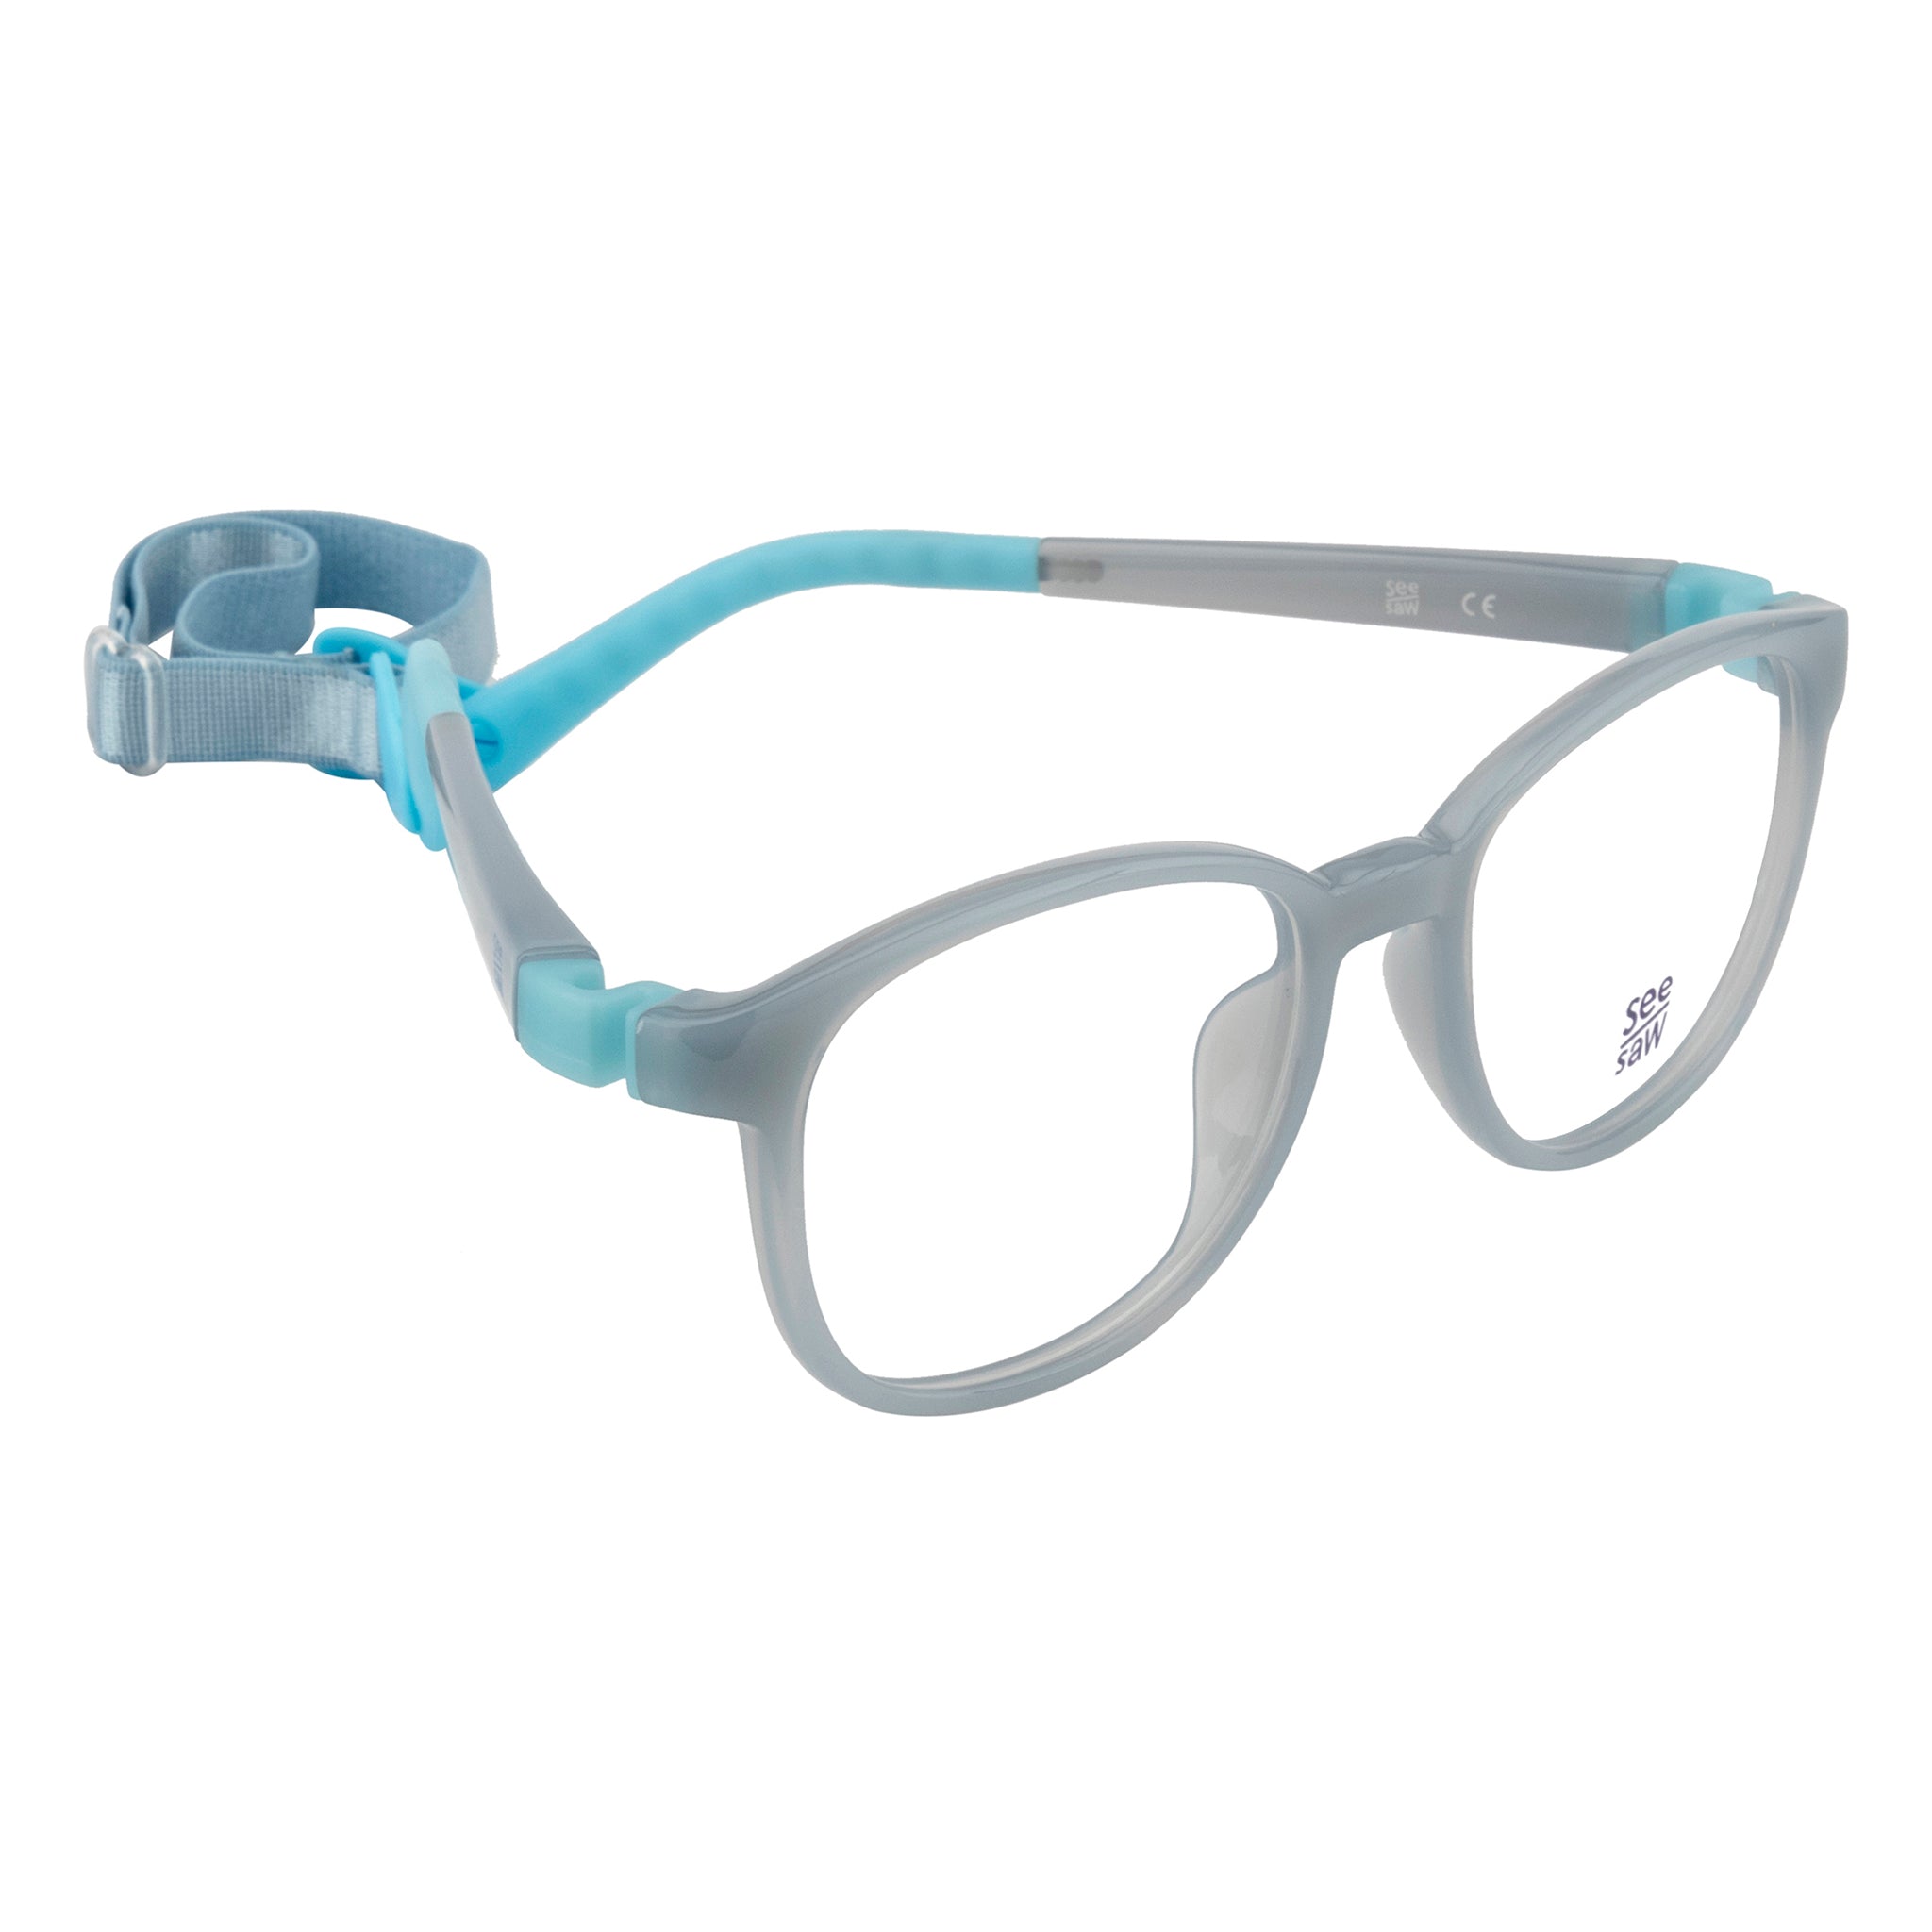 See Saw Flexi SS1091 46 Rectangle Acetate